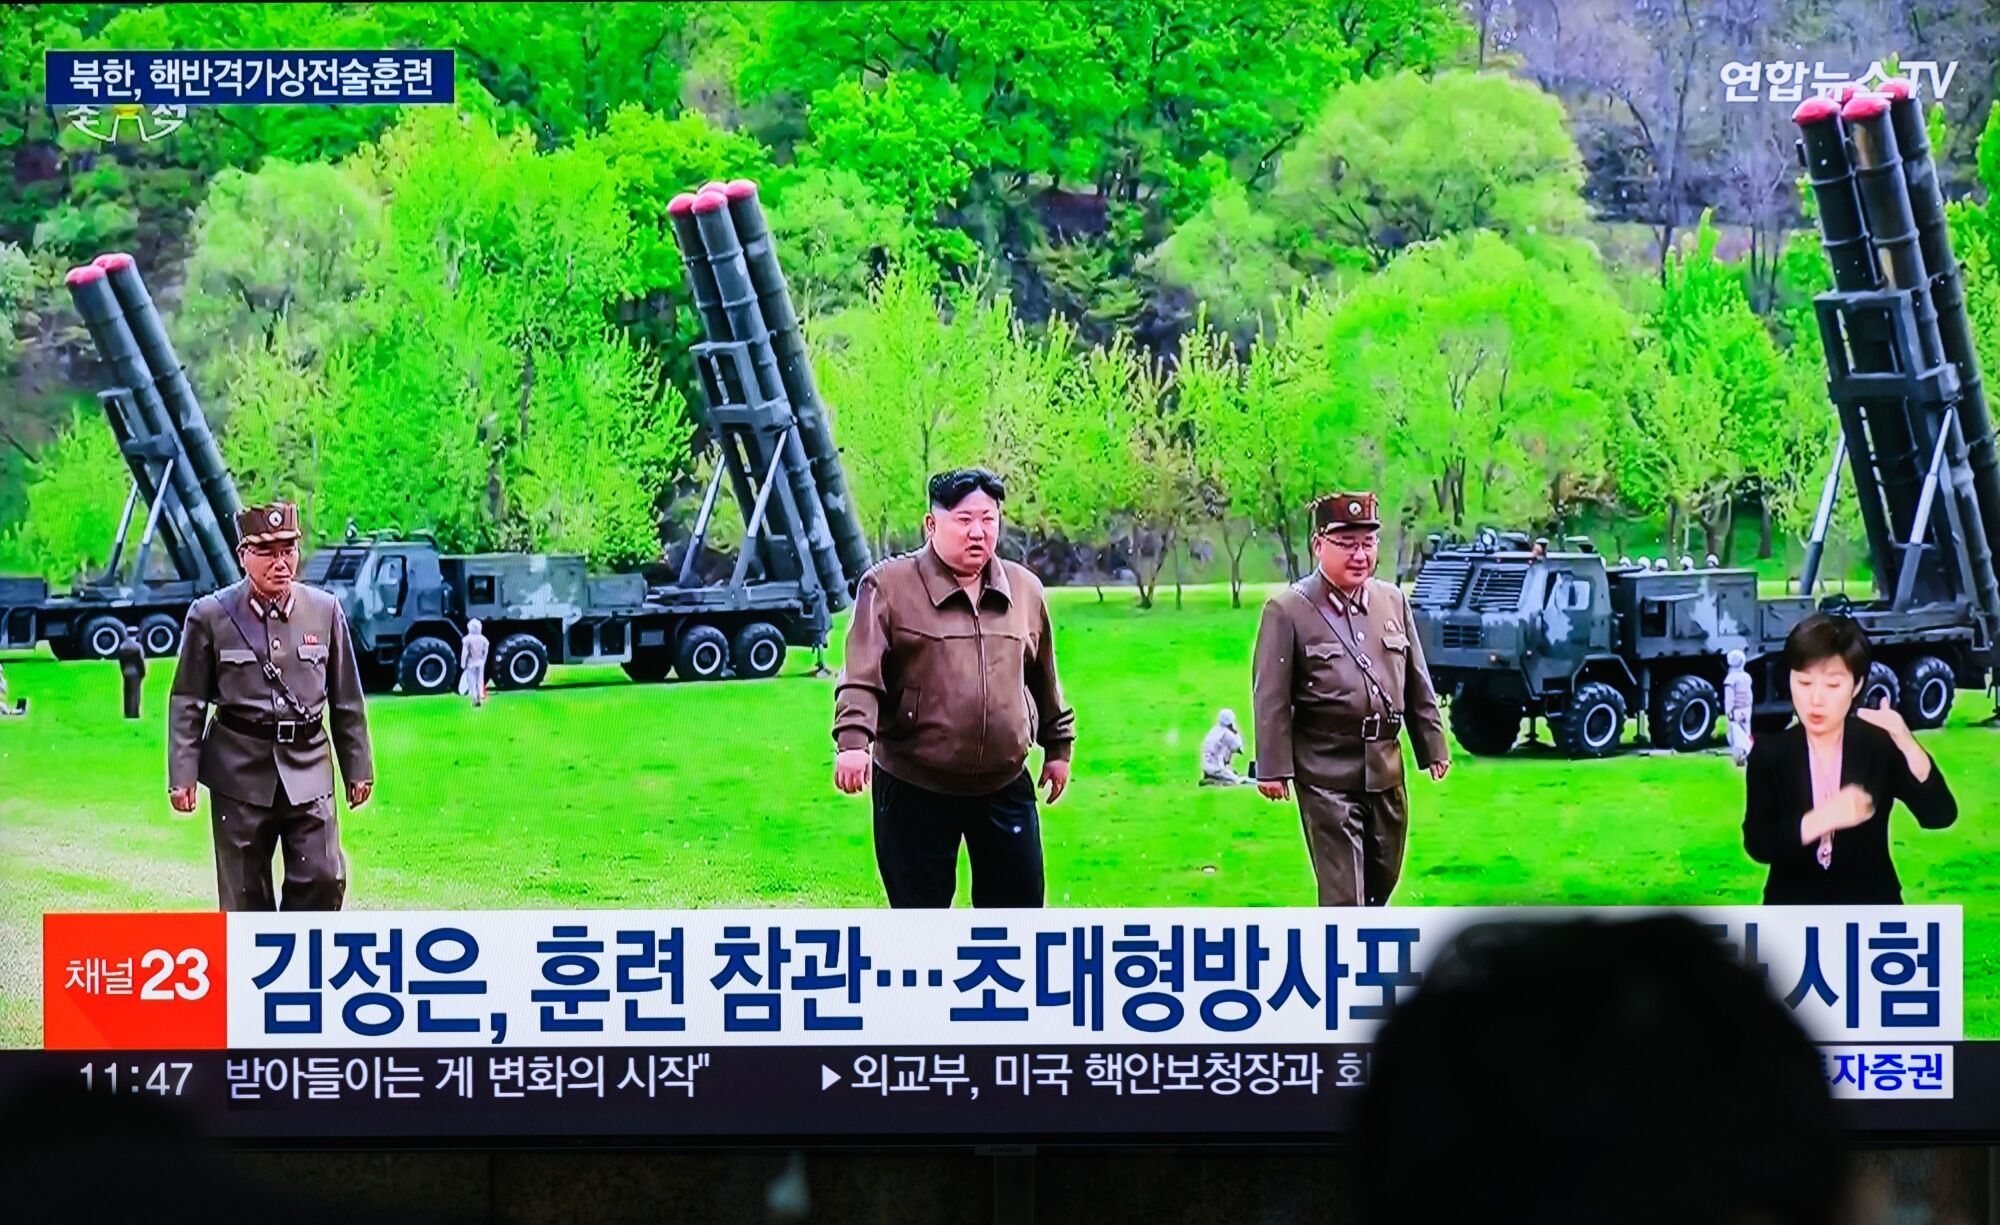 kim jong un tests new rockets to strike seoul and perhaps sell to putin